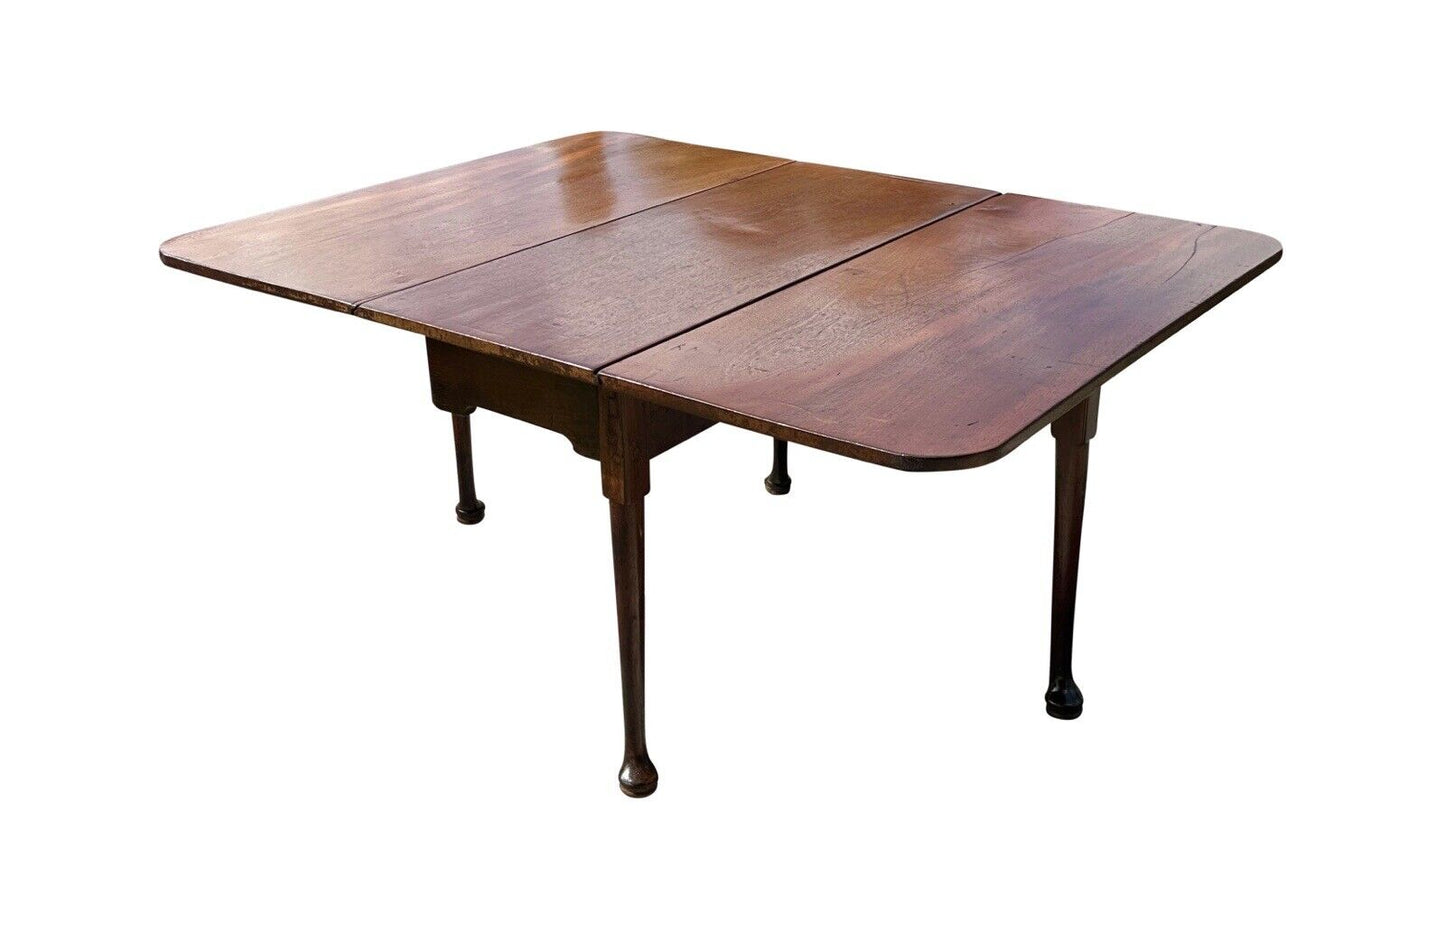 18th Century Queen Anne Boston Mahogany Dropleaf Dining Table Circa 1760 - 1780